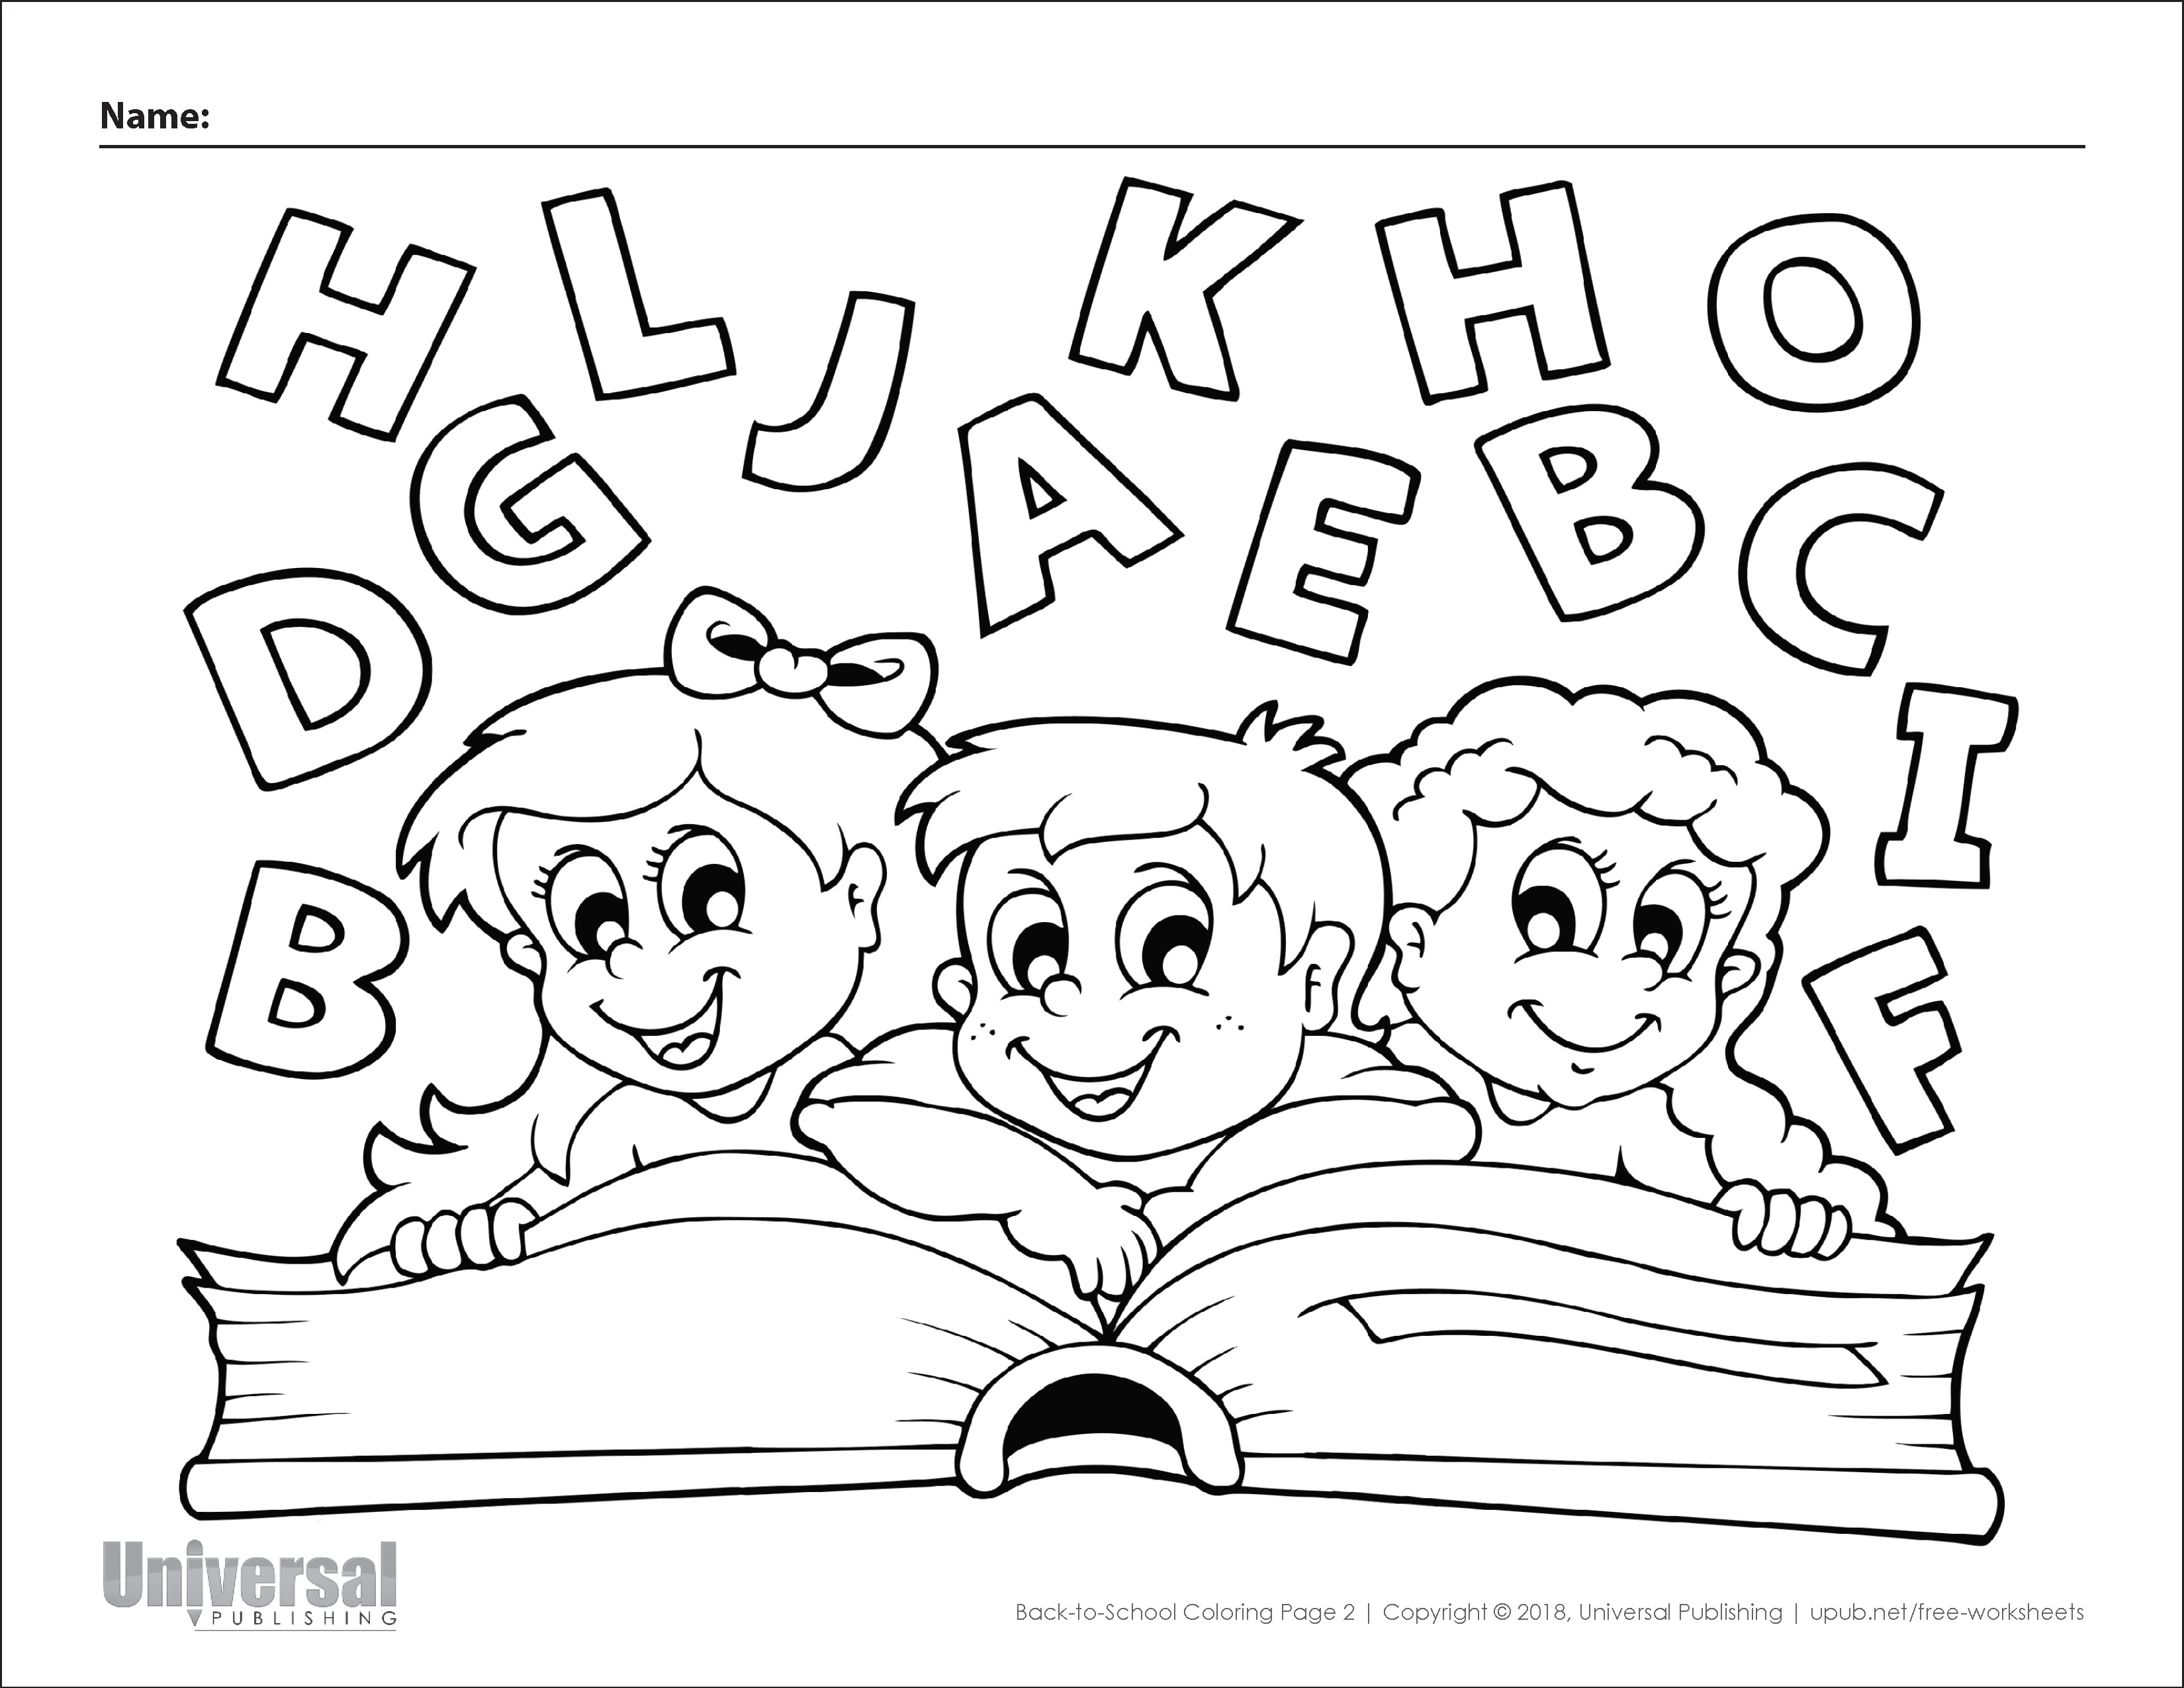 Back to School Coloring Page 2